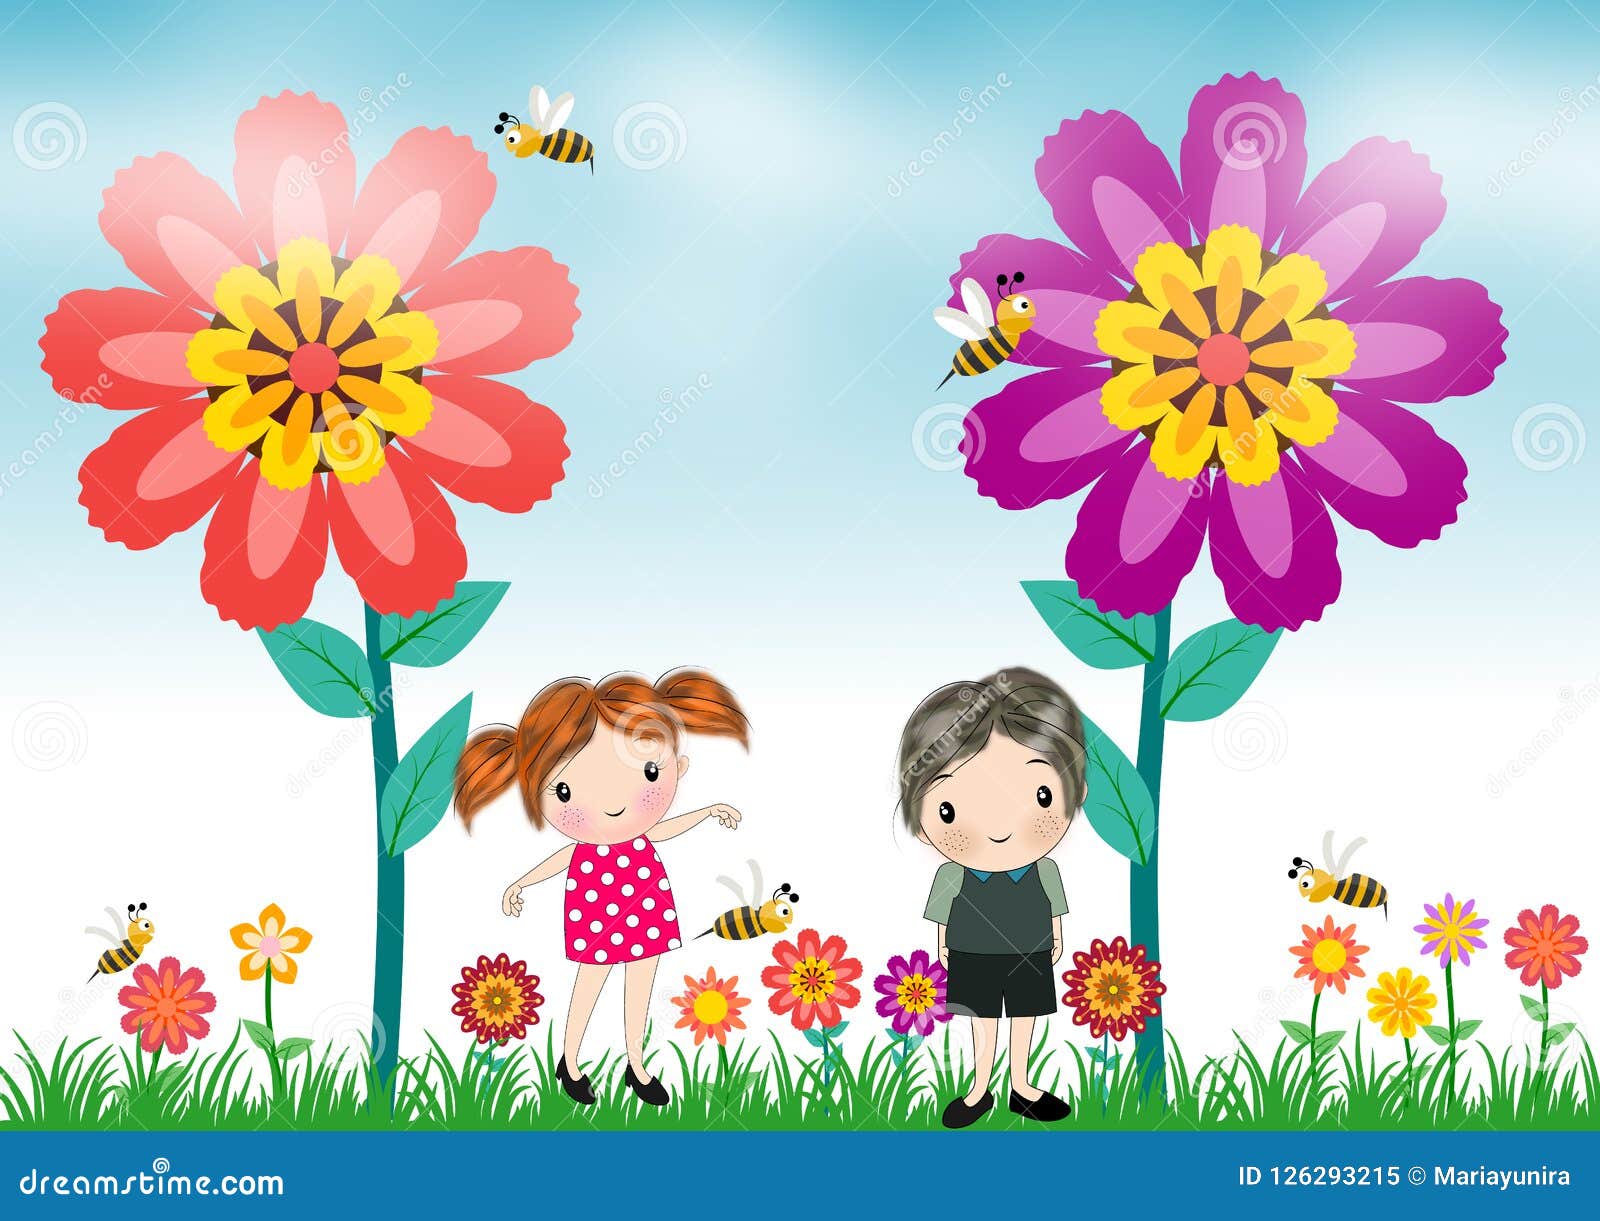 Kids Girl Playing in the Garden Background Stock Illustration -  Illustration of cute, flowers: 126293215